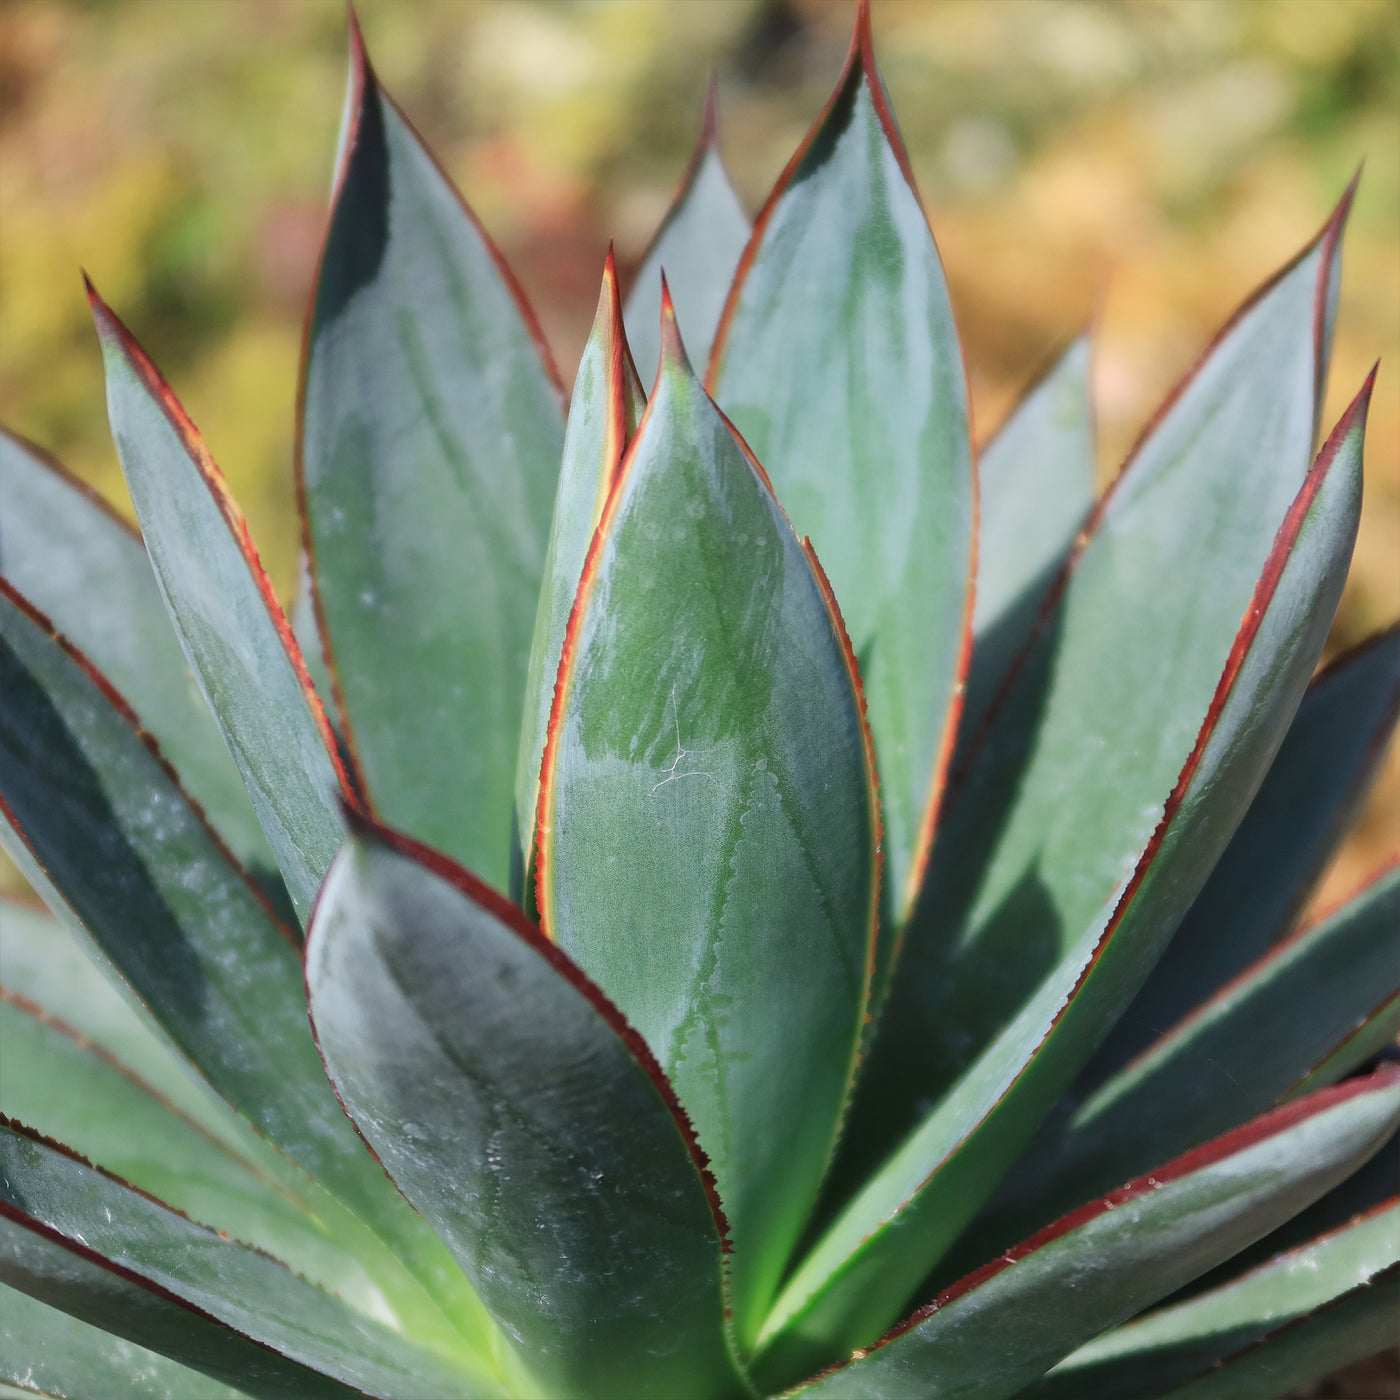 Agave Blue Glow